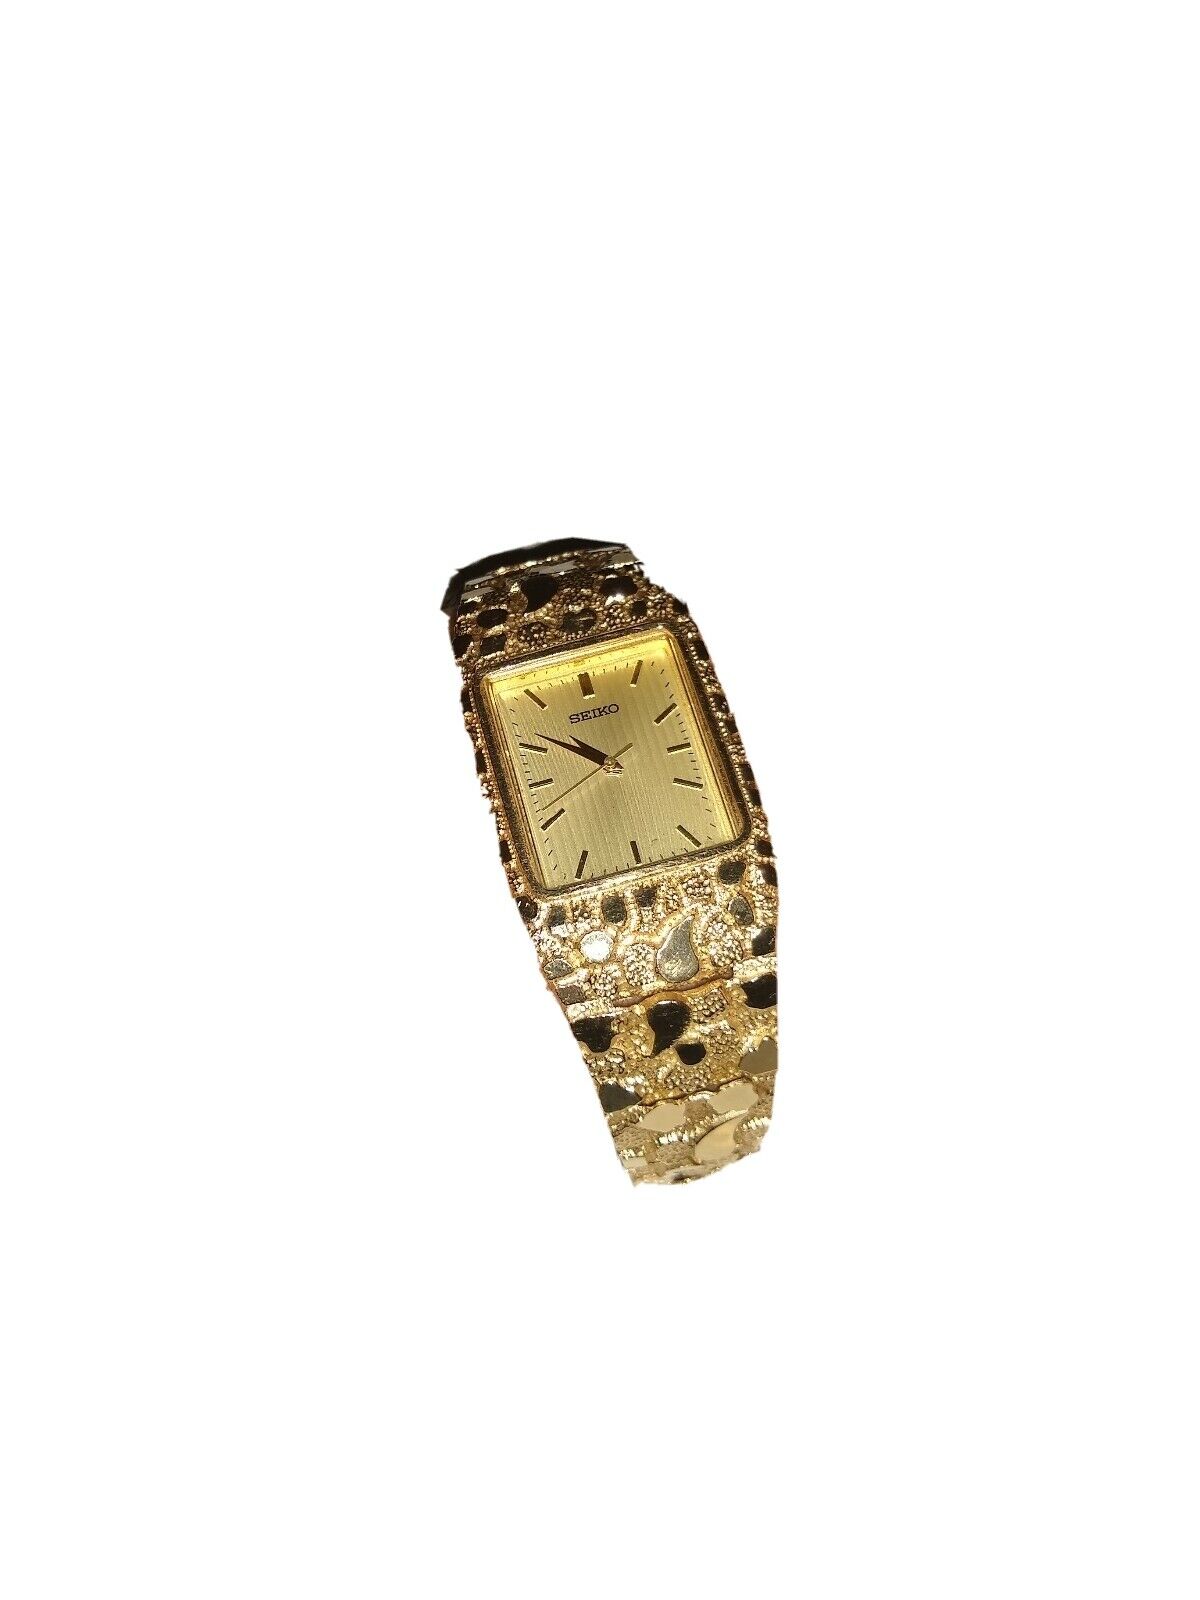 Seiko 10k Genuine Gold Nugget Watch Authentic Not Plated 